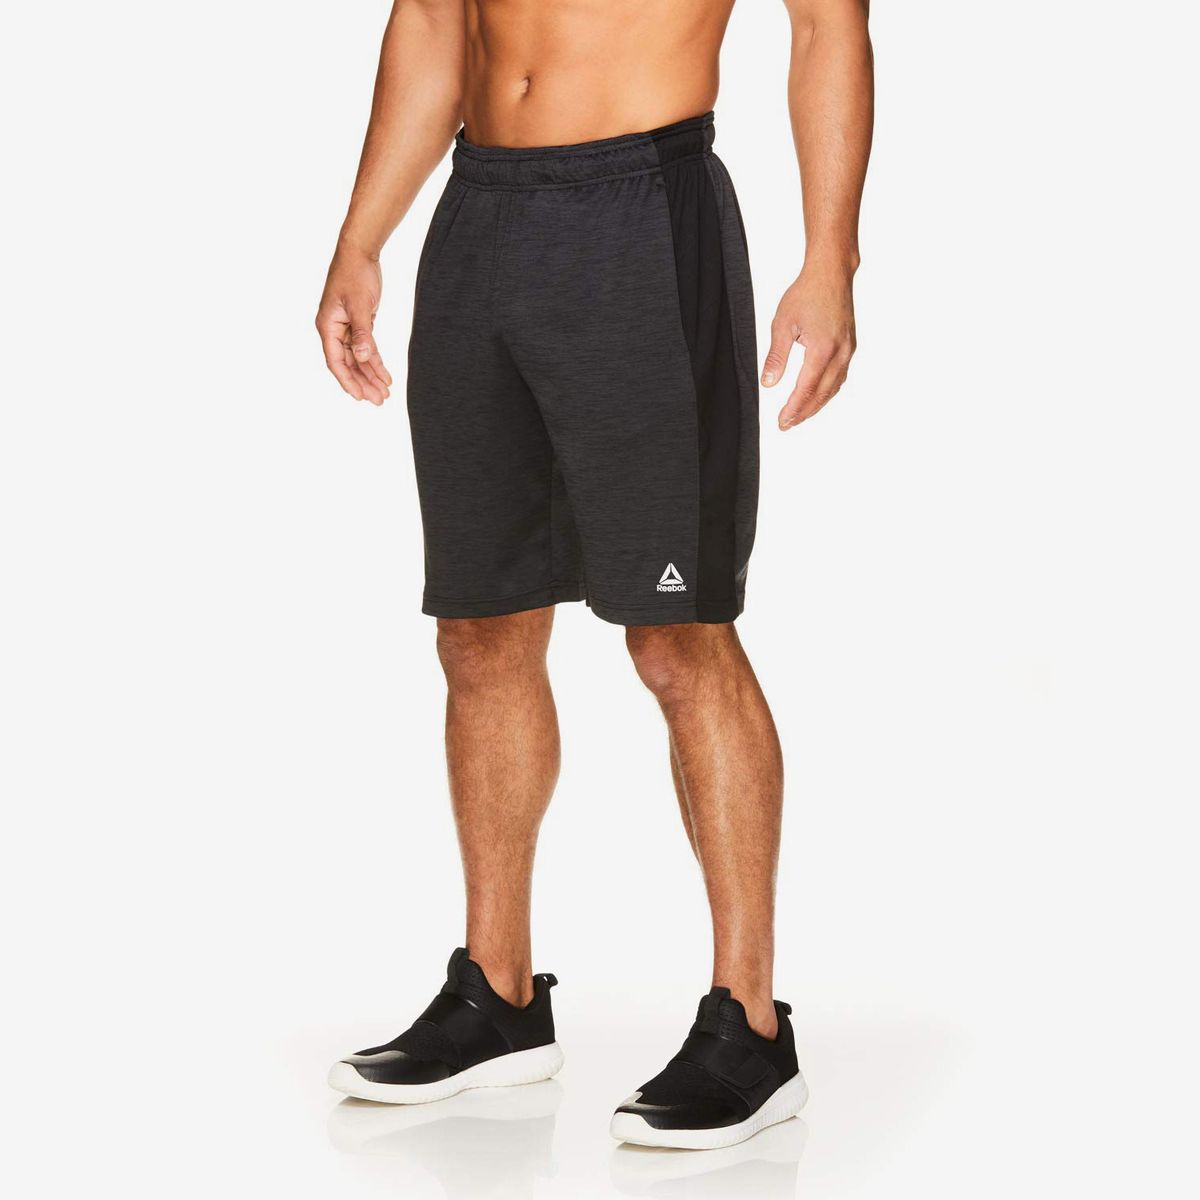 Under Armour Mens MK-1 Shorts Pants Trousers Bottoms Navy Blue Sports Gym 